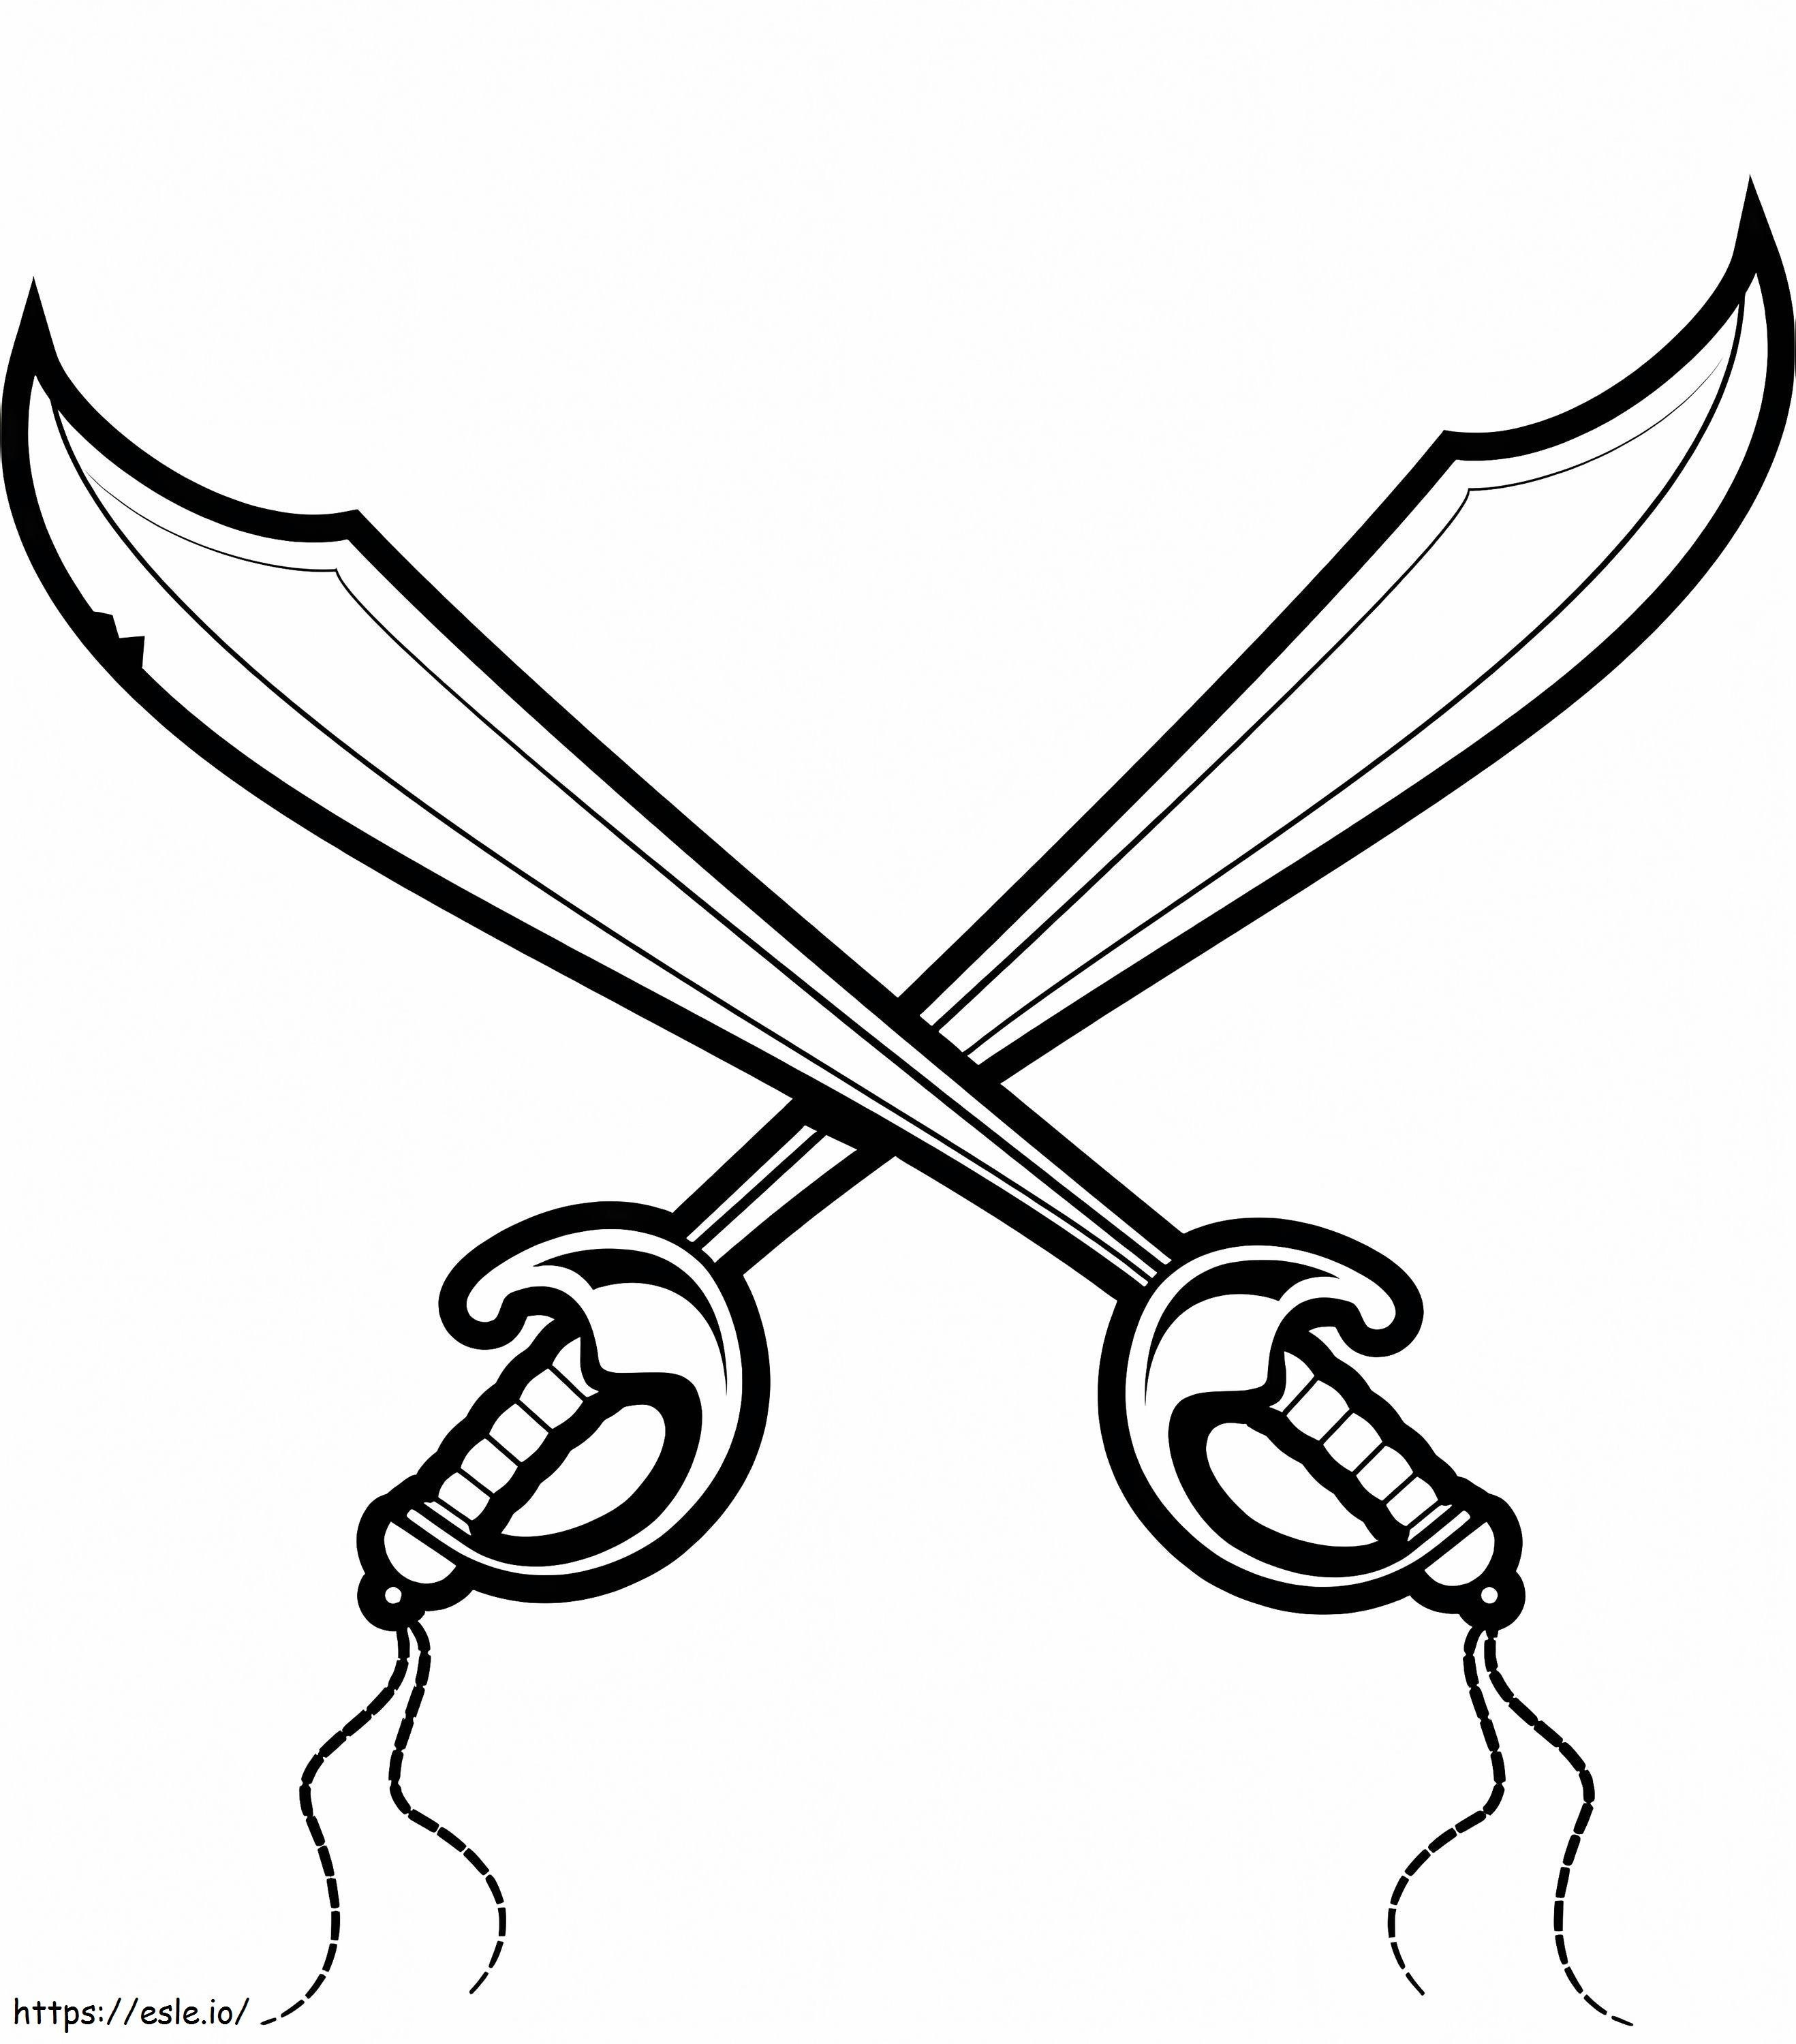 Pirate Swords coloring page